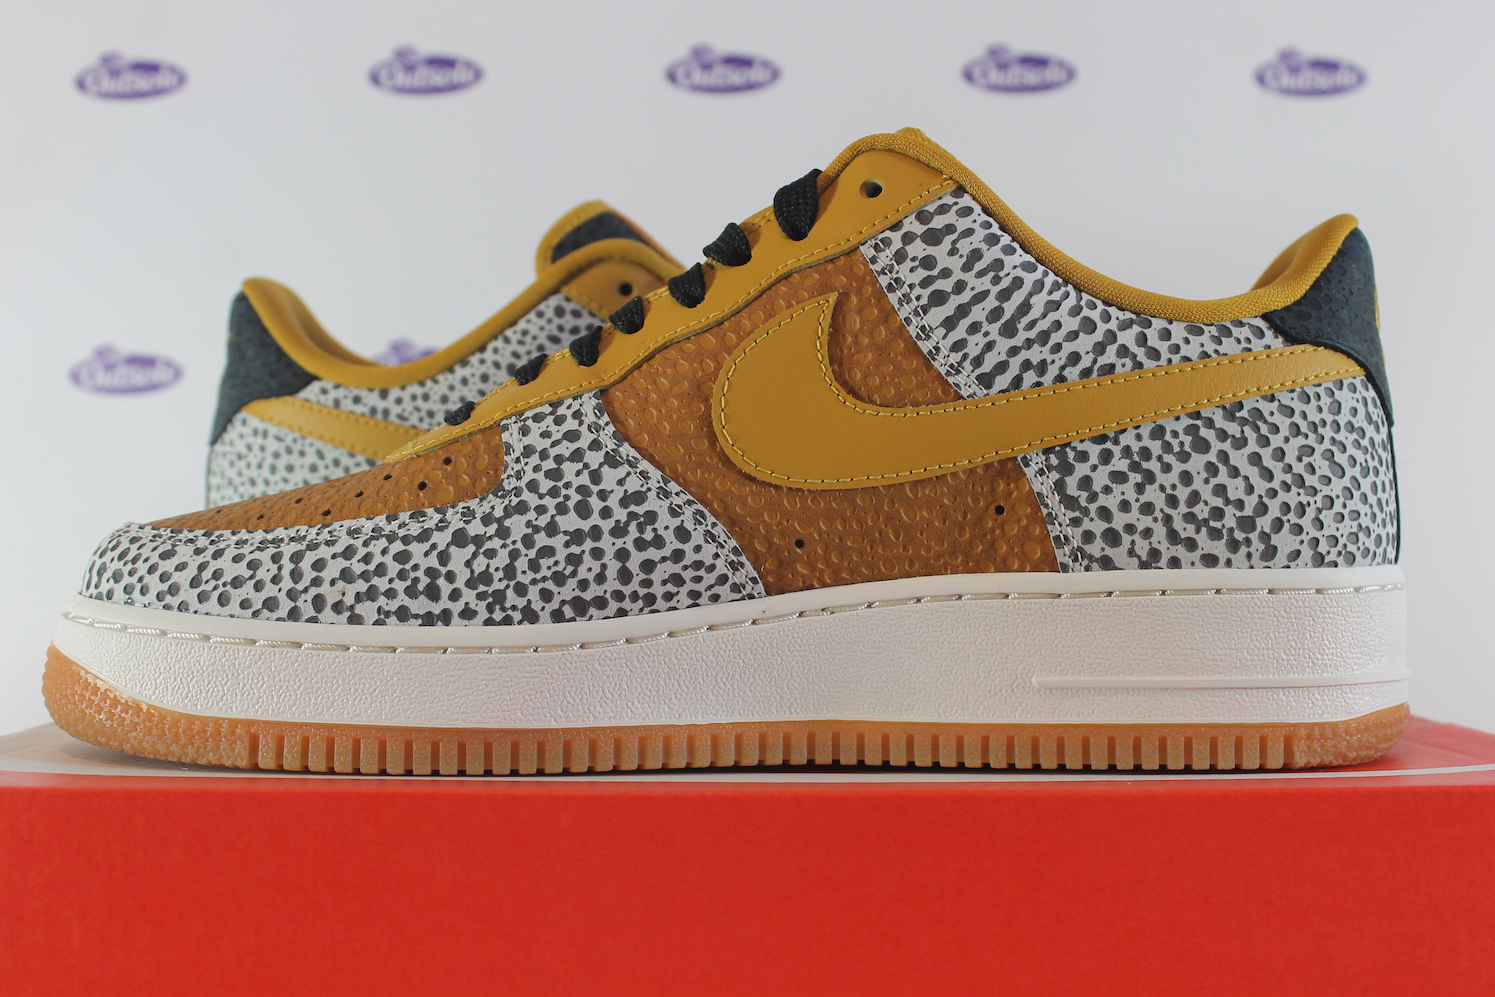 Exclusivo Persona responsable aventuras Nike Air Force 1 By You (ID) Premium Safari • ✓ In stock at Outsole